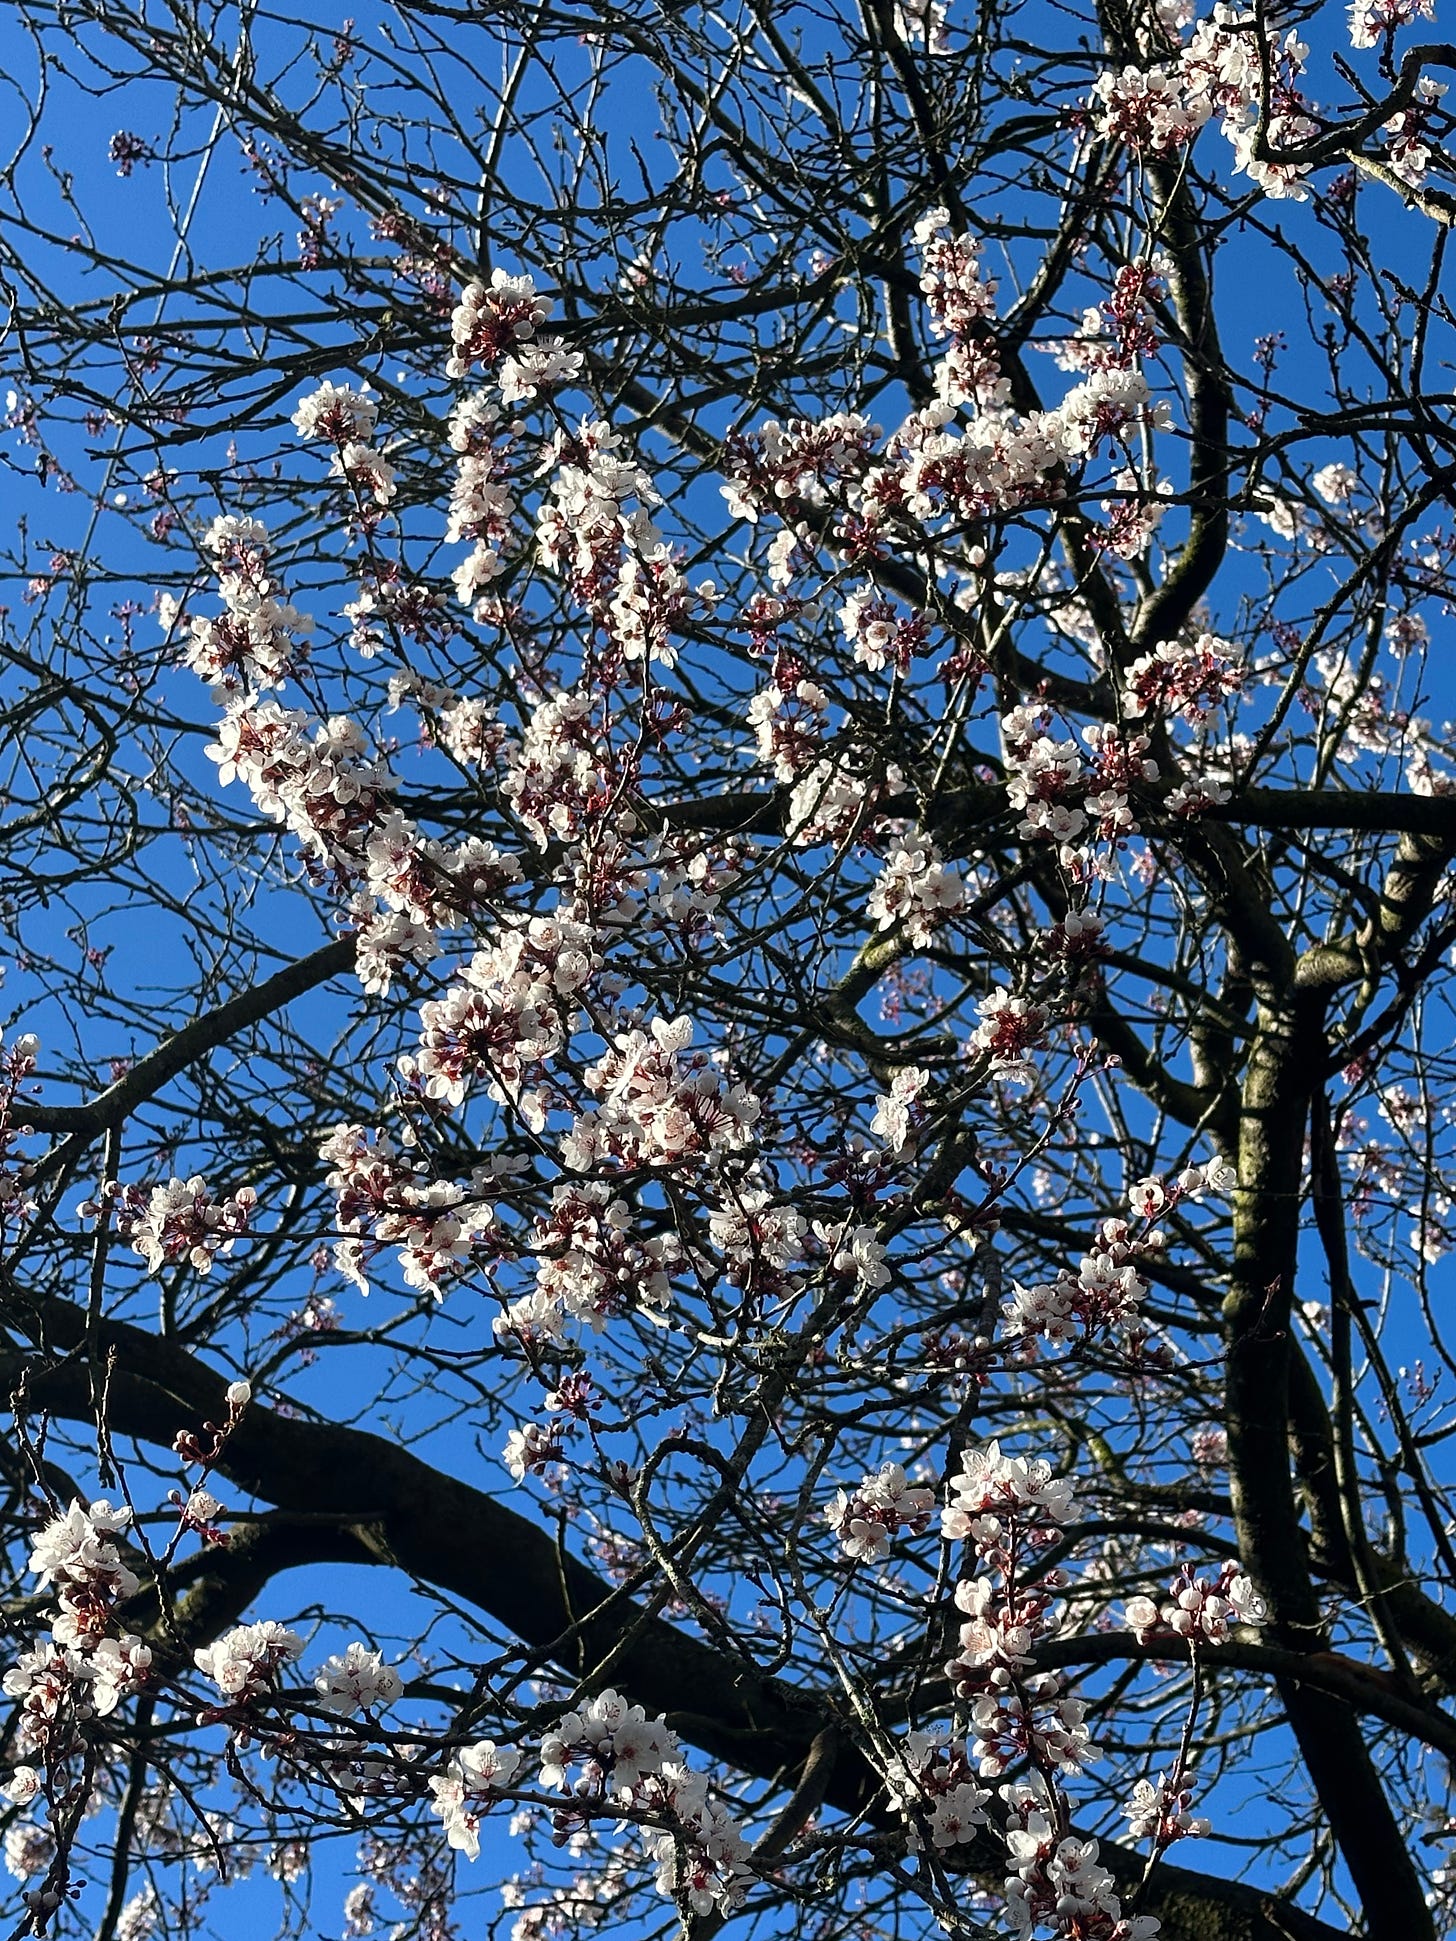 Image shows a blosson tree with pink blossom and a bright blue sky